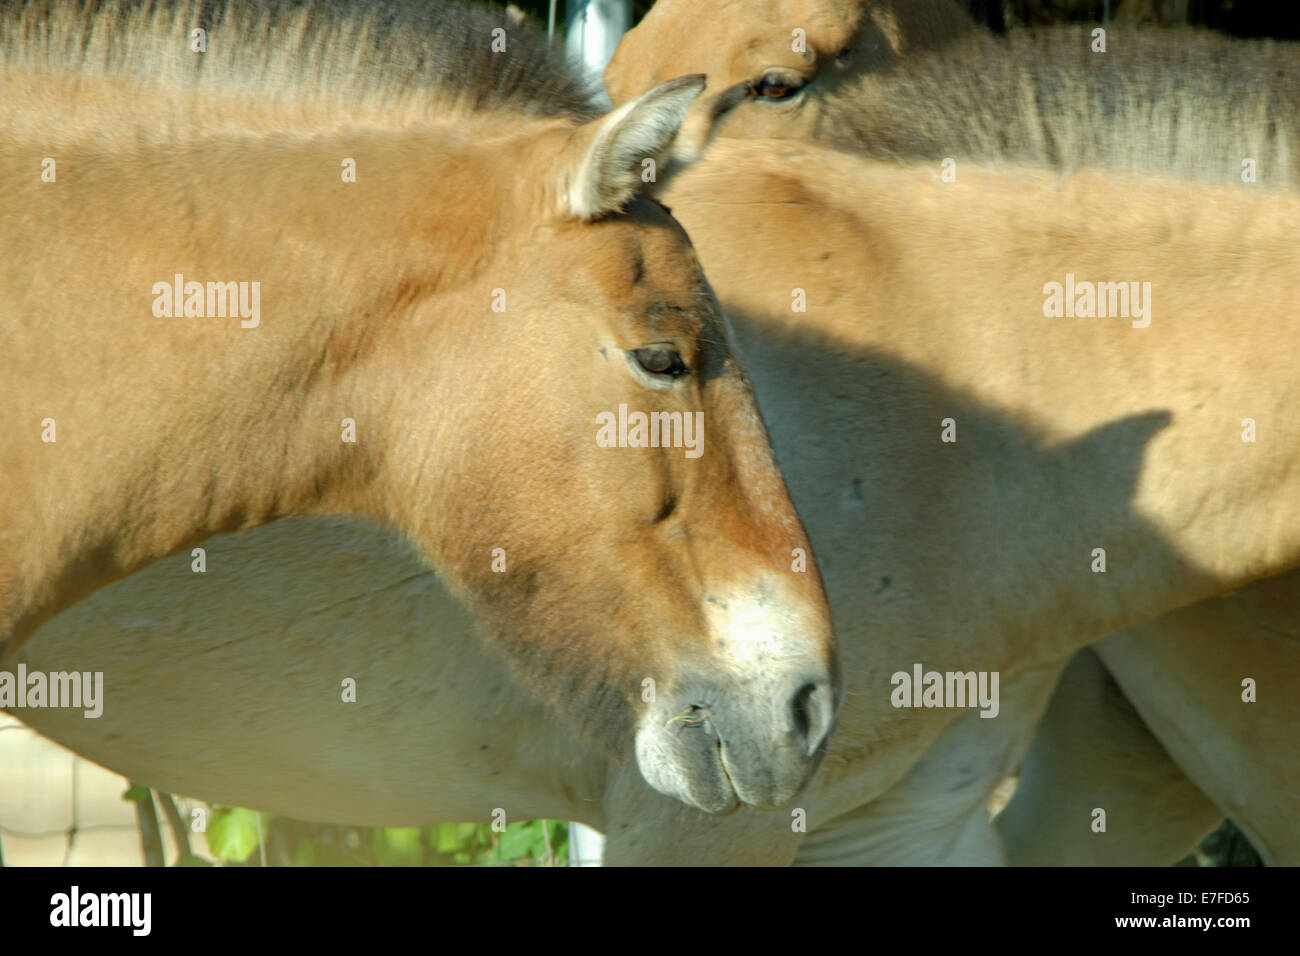 Przewalski's horse or Dzungarian horse, is a rare and endangered subspecies of wild horse (Equus ferus). Stock Photo